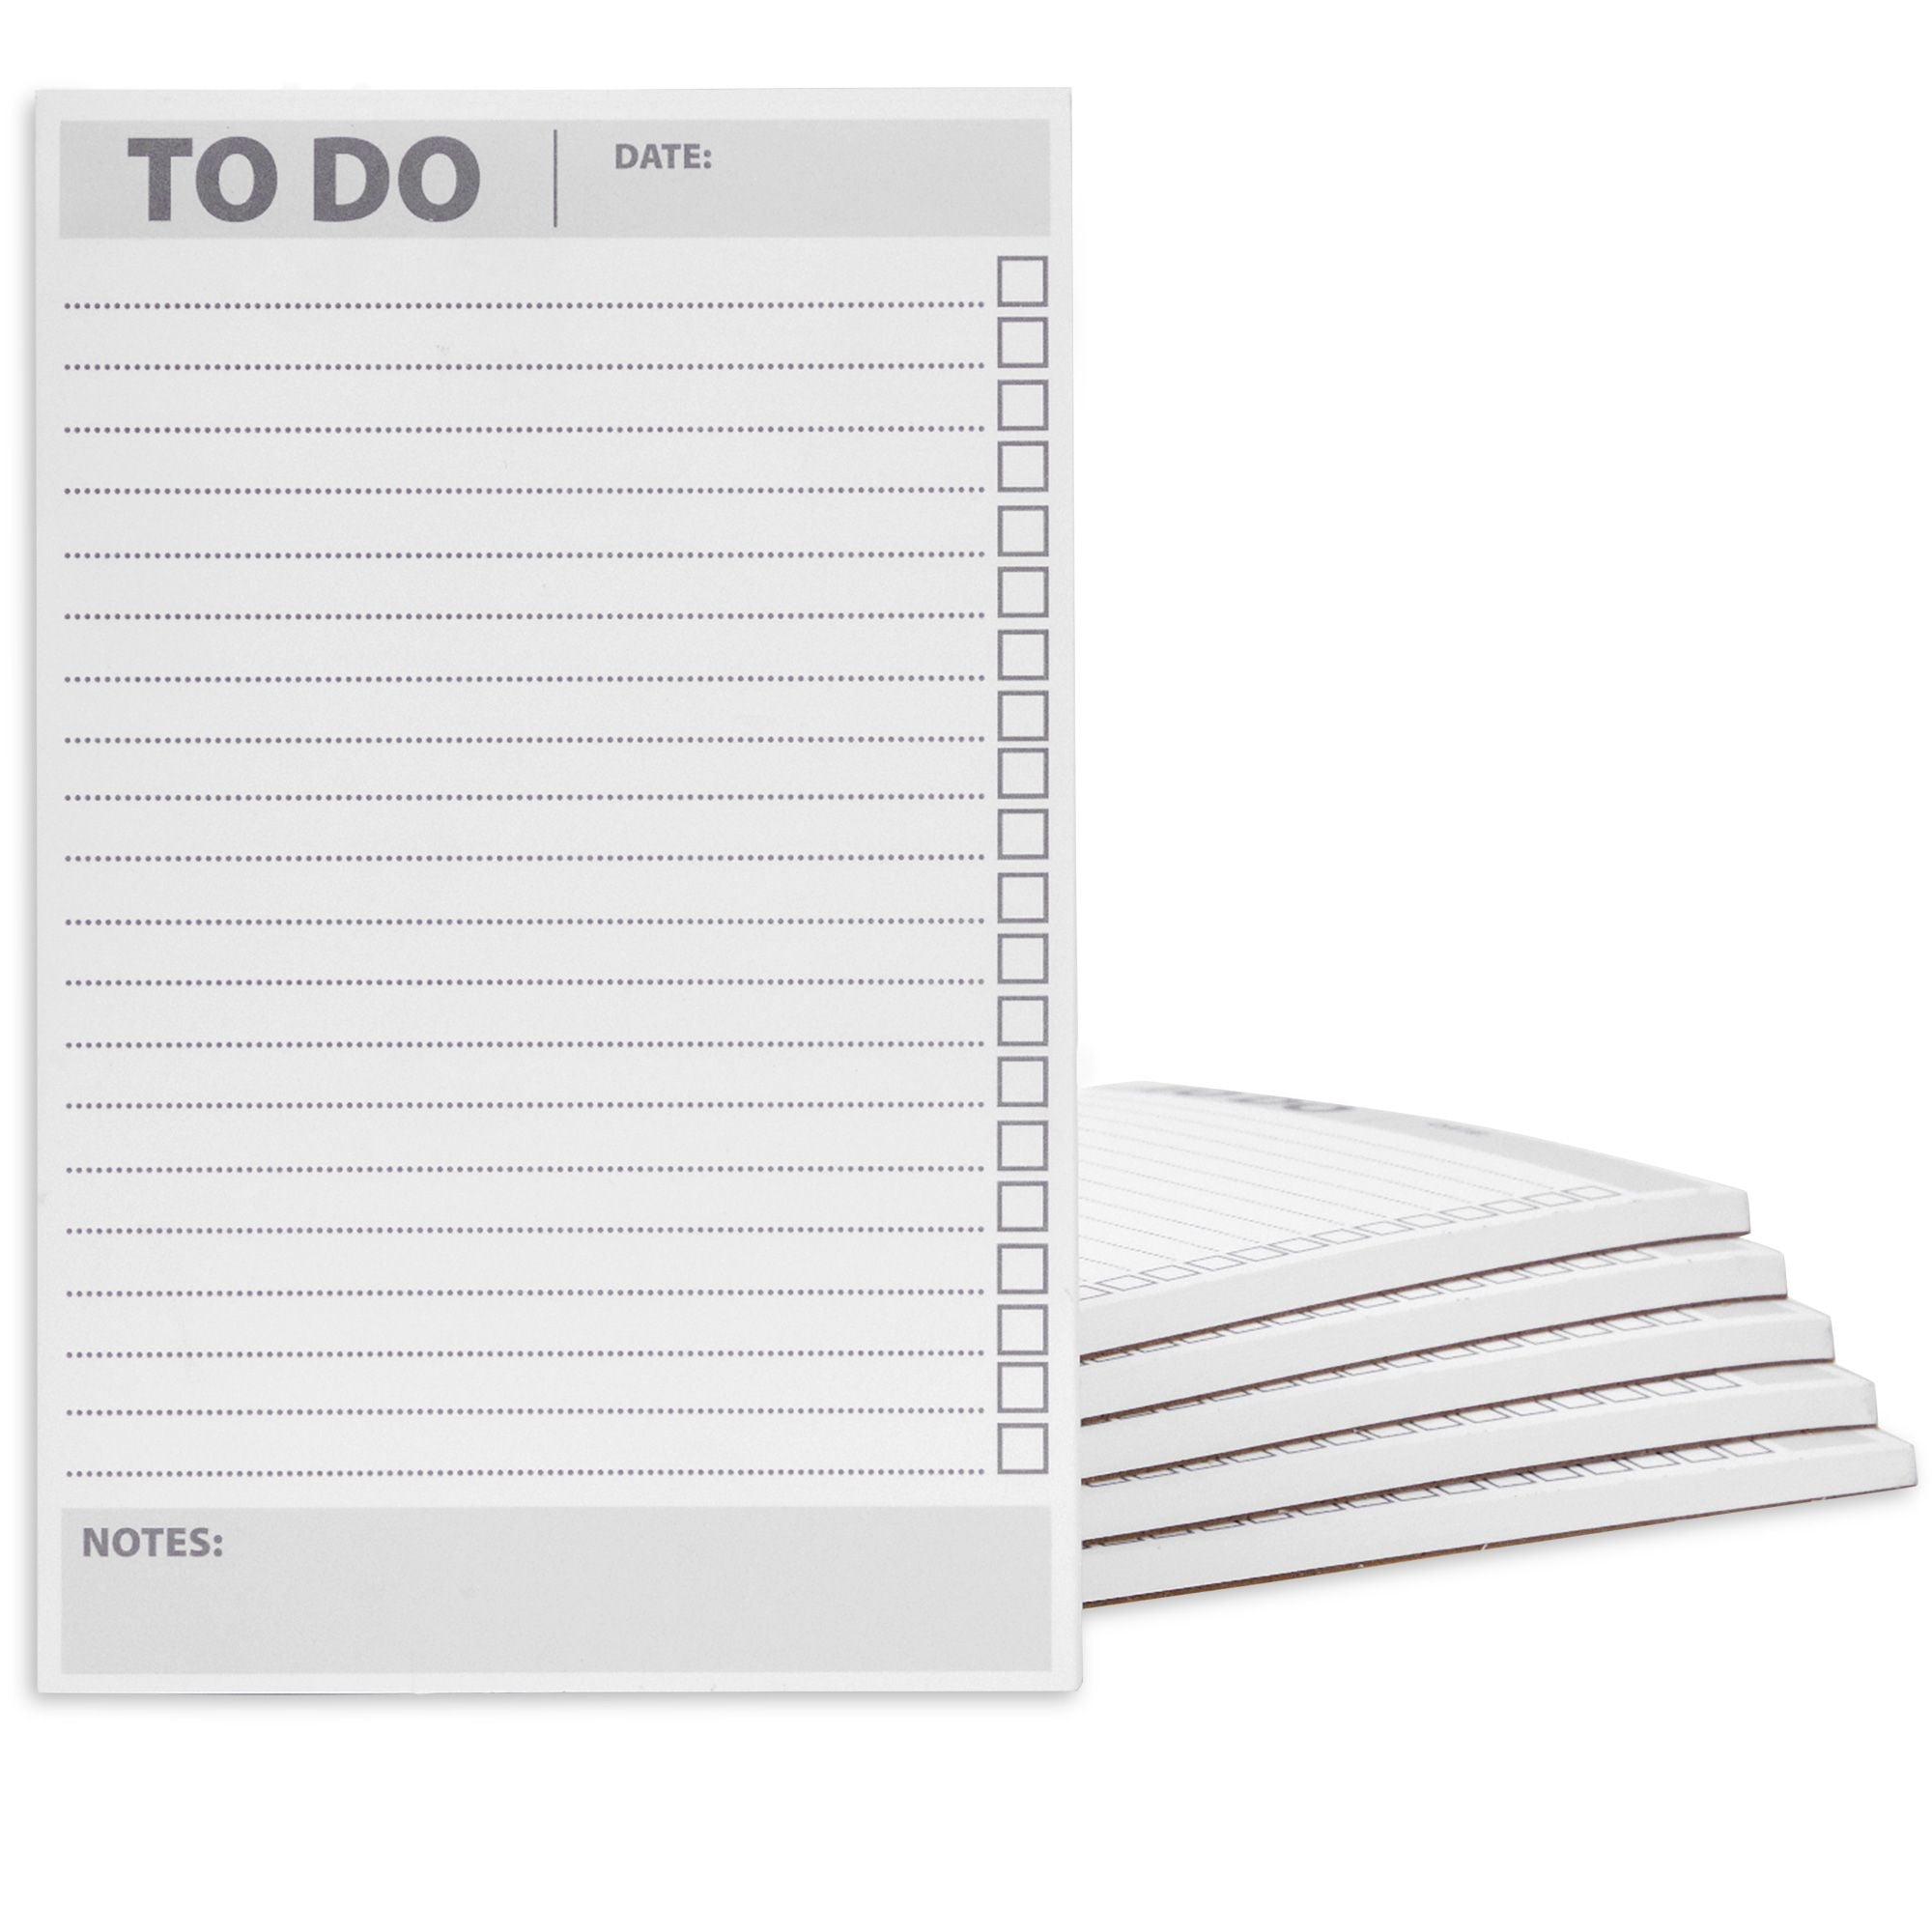 Wholesale To Do List - Daily Planner - Carnet De Note - Papeterie - Pad De  Notes - Mémo Notes - Notebook - To Do List - 50 Pages - 4.25 X 5.5 for  your store - Faire Canada